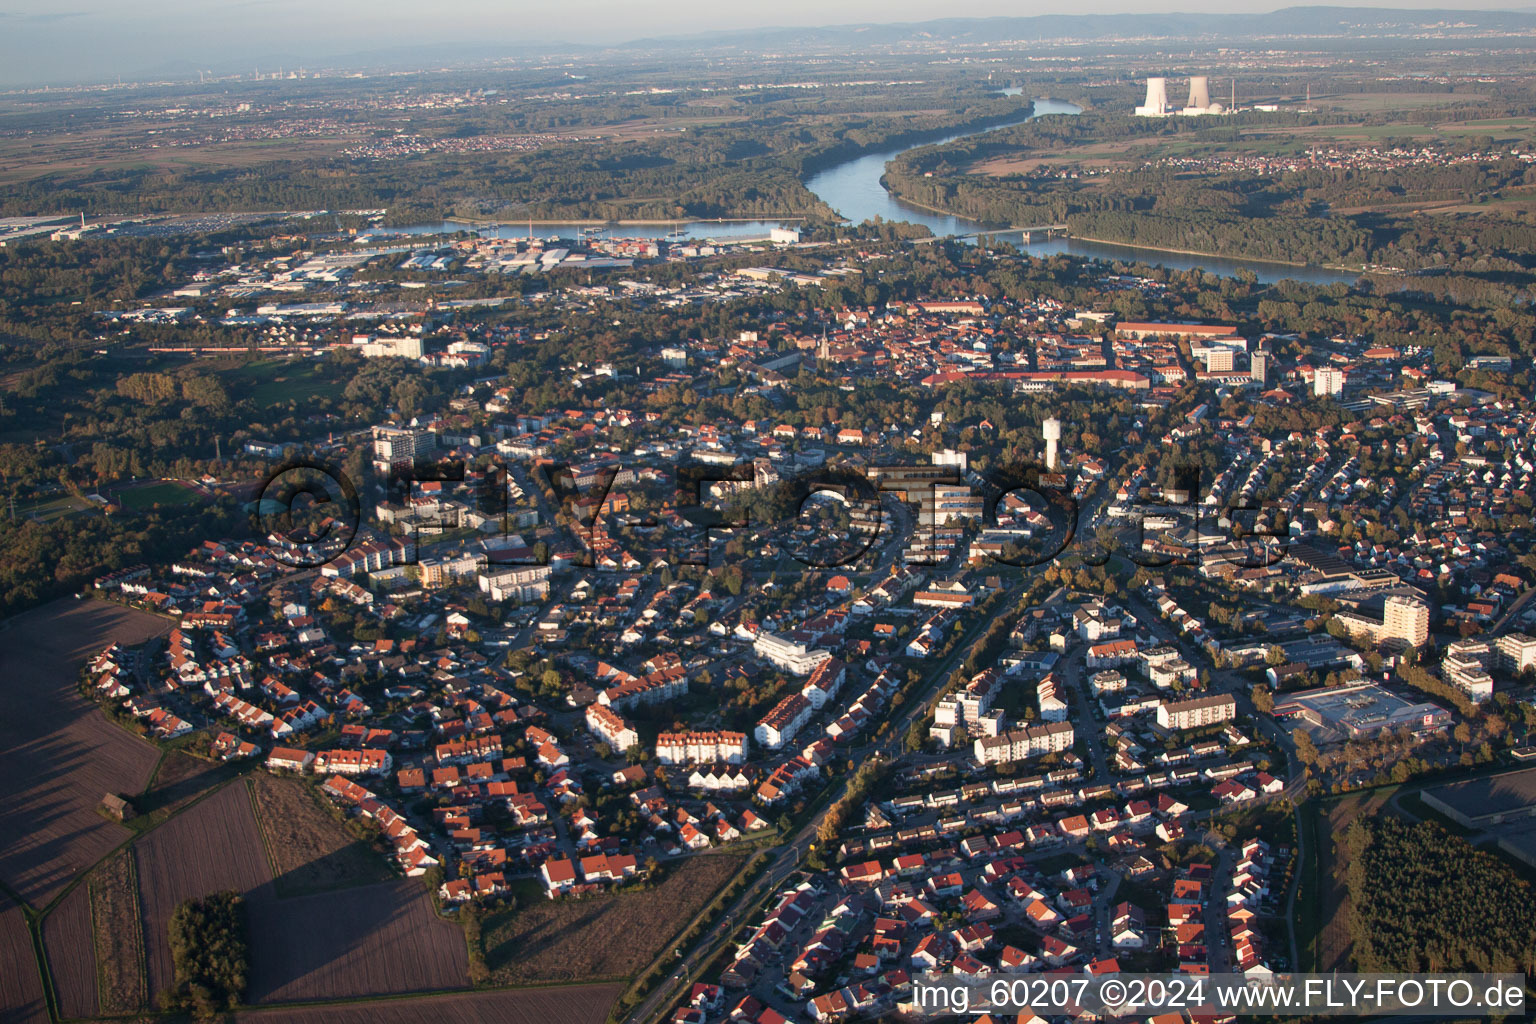 Aerial photograpy of City view on the river bank of the Rhine river in Germersheim in the state Rhineland-Palatinate, Germany